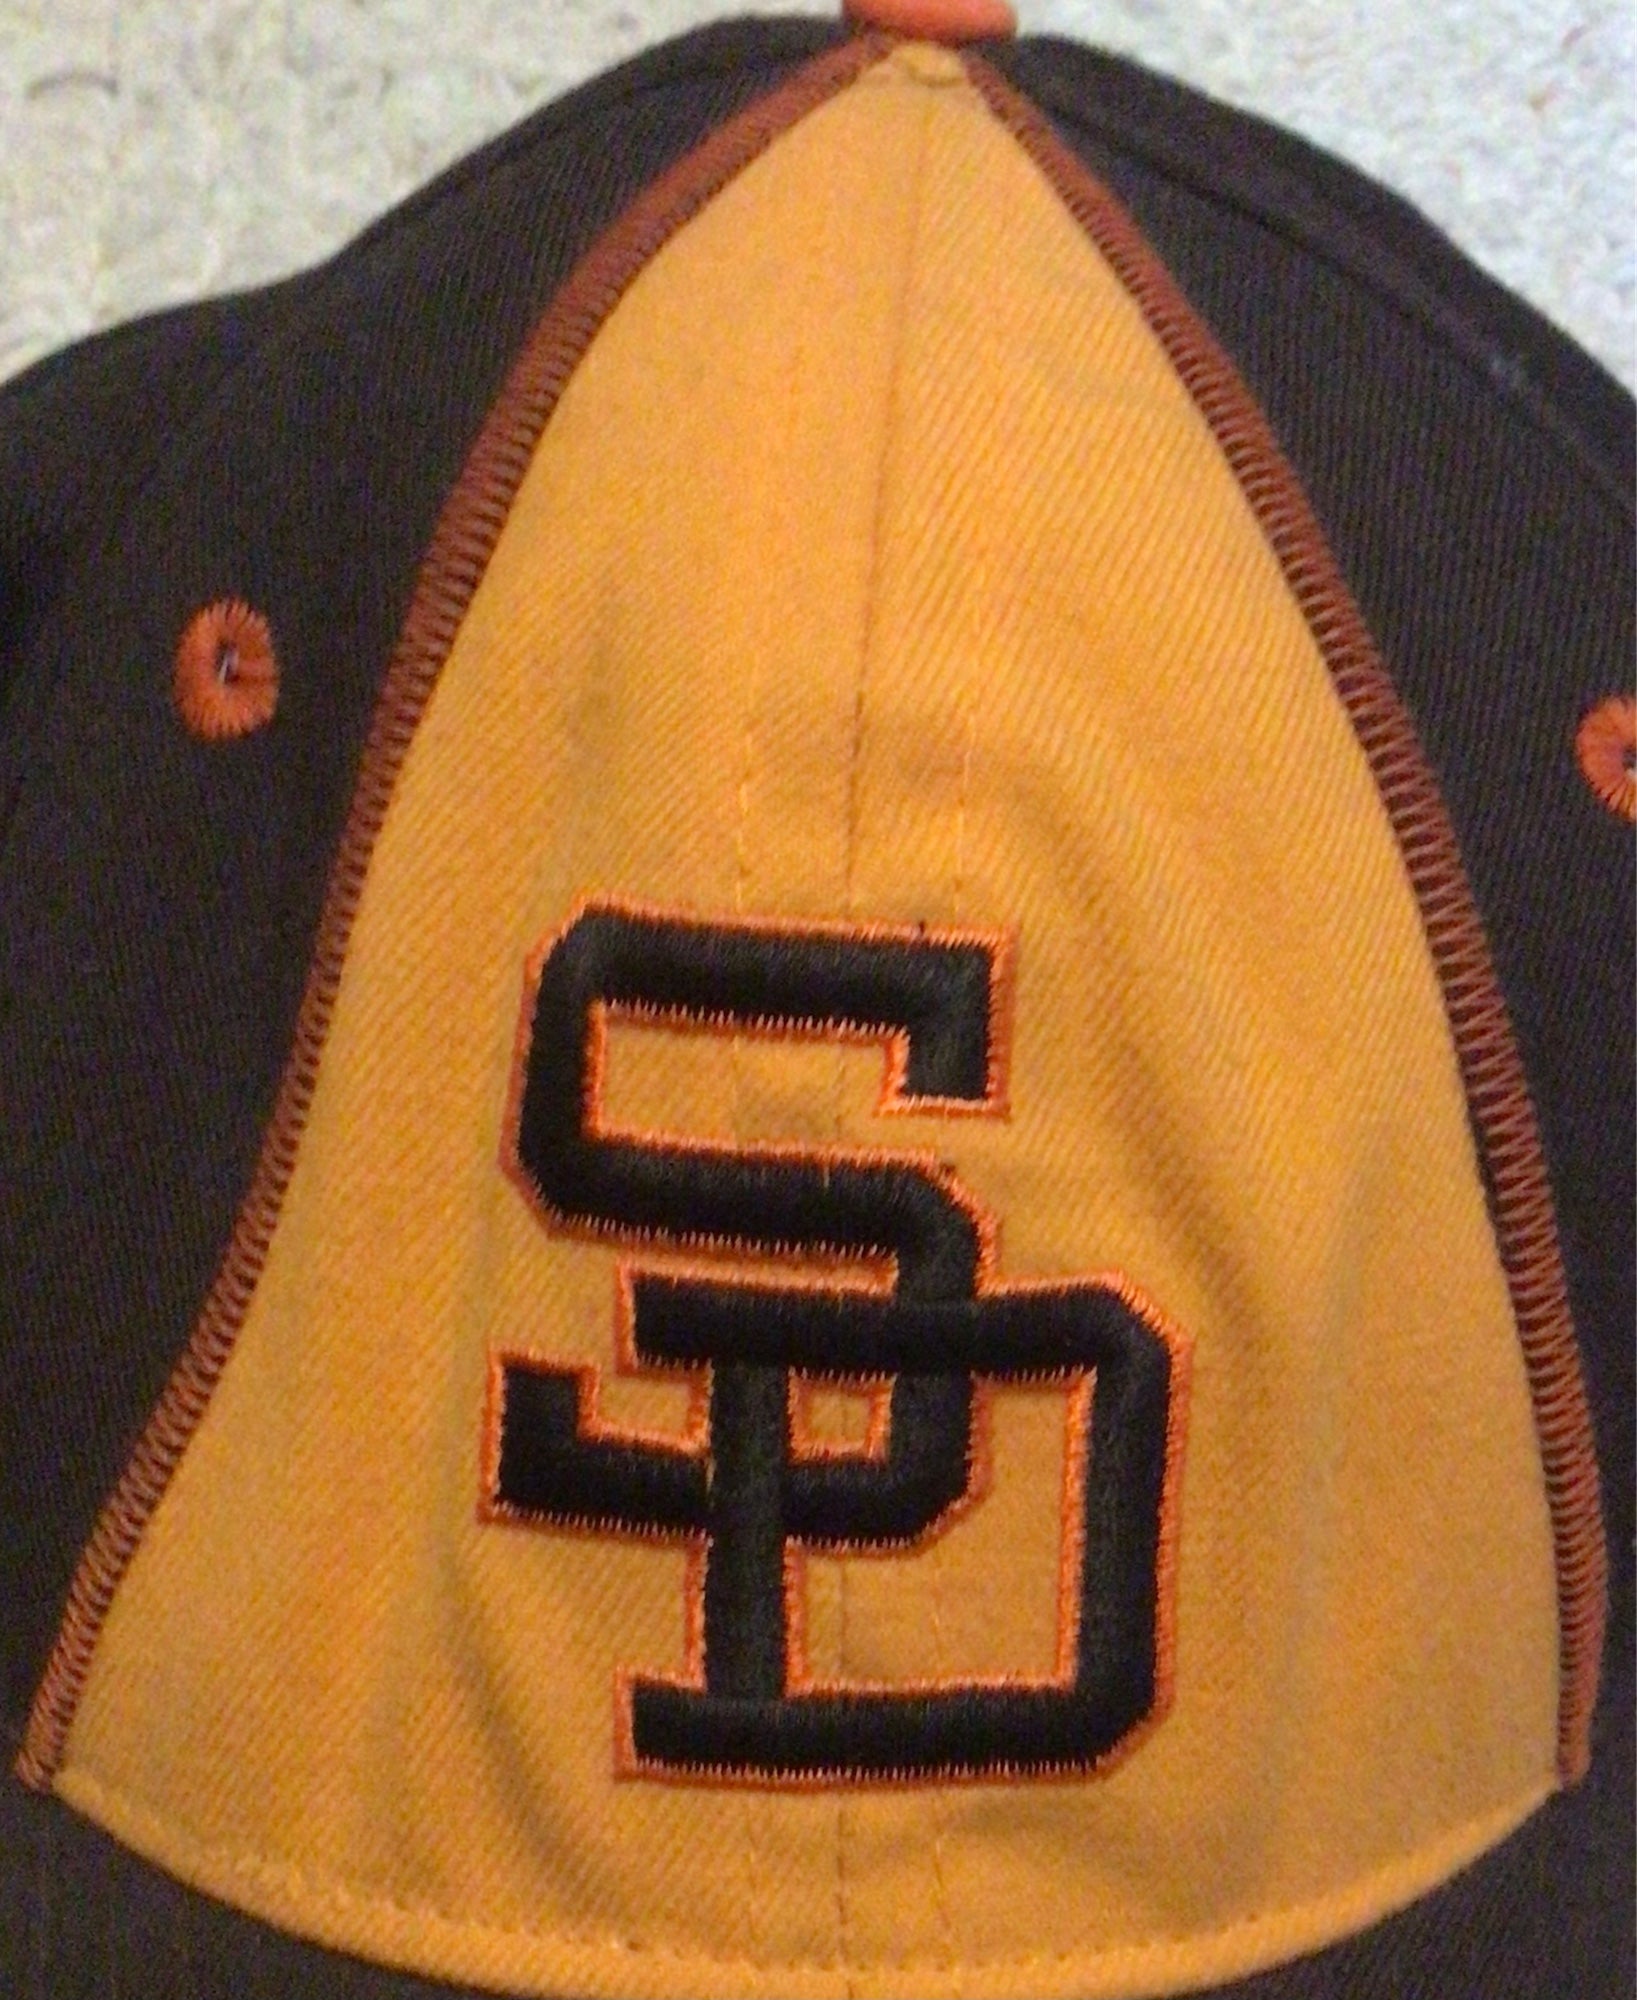 I got my custom Blue and Yellow Padres jersey done to match the 2016 hat.  Figured I'd share here : r/Padres